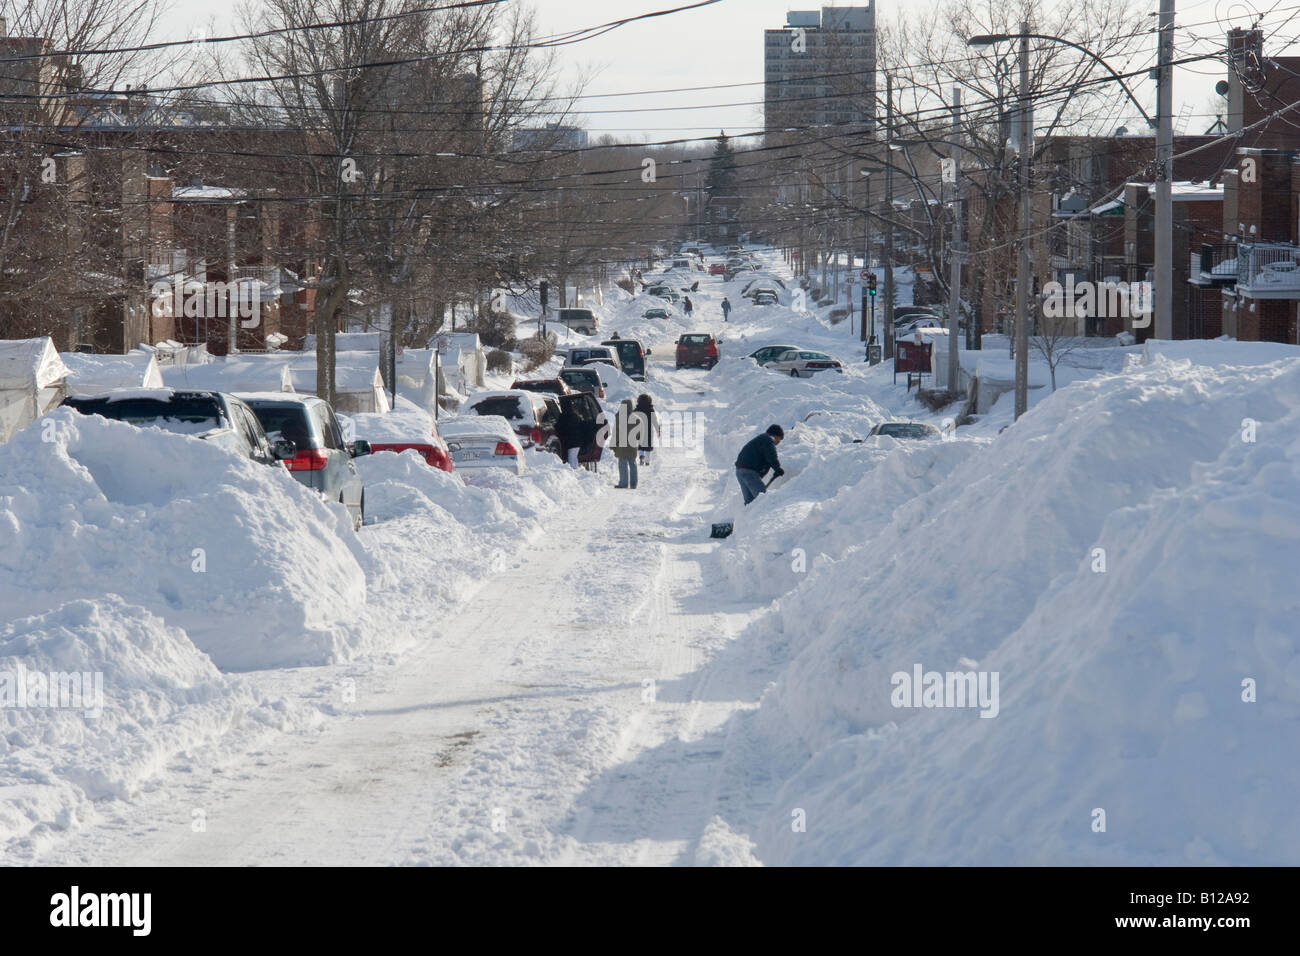 A scene along snow bound Montreal suburban street after a heavy snow ...